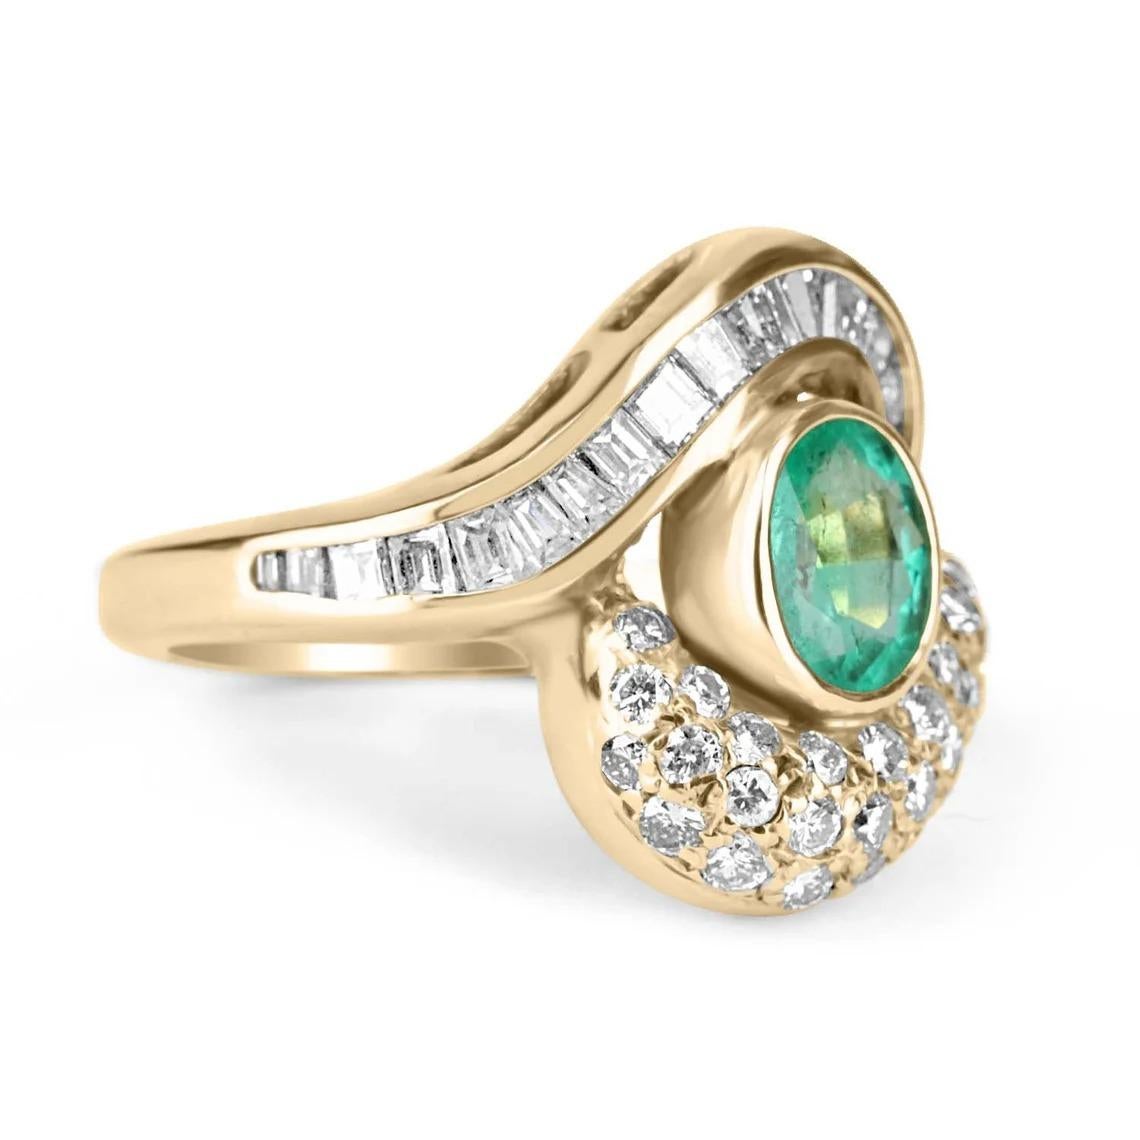 Featured is a vintage emerald & diamond statement ring. The center stone carries a 0.95-carat oval cut, Colombian emerald; displaying a lovely medium green color with very good luster and semi-transparent eye clarity. The bypass shank has half